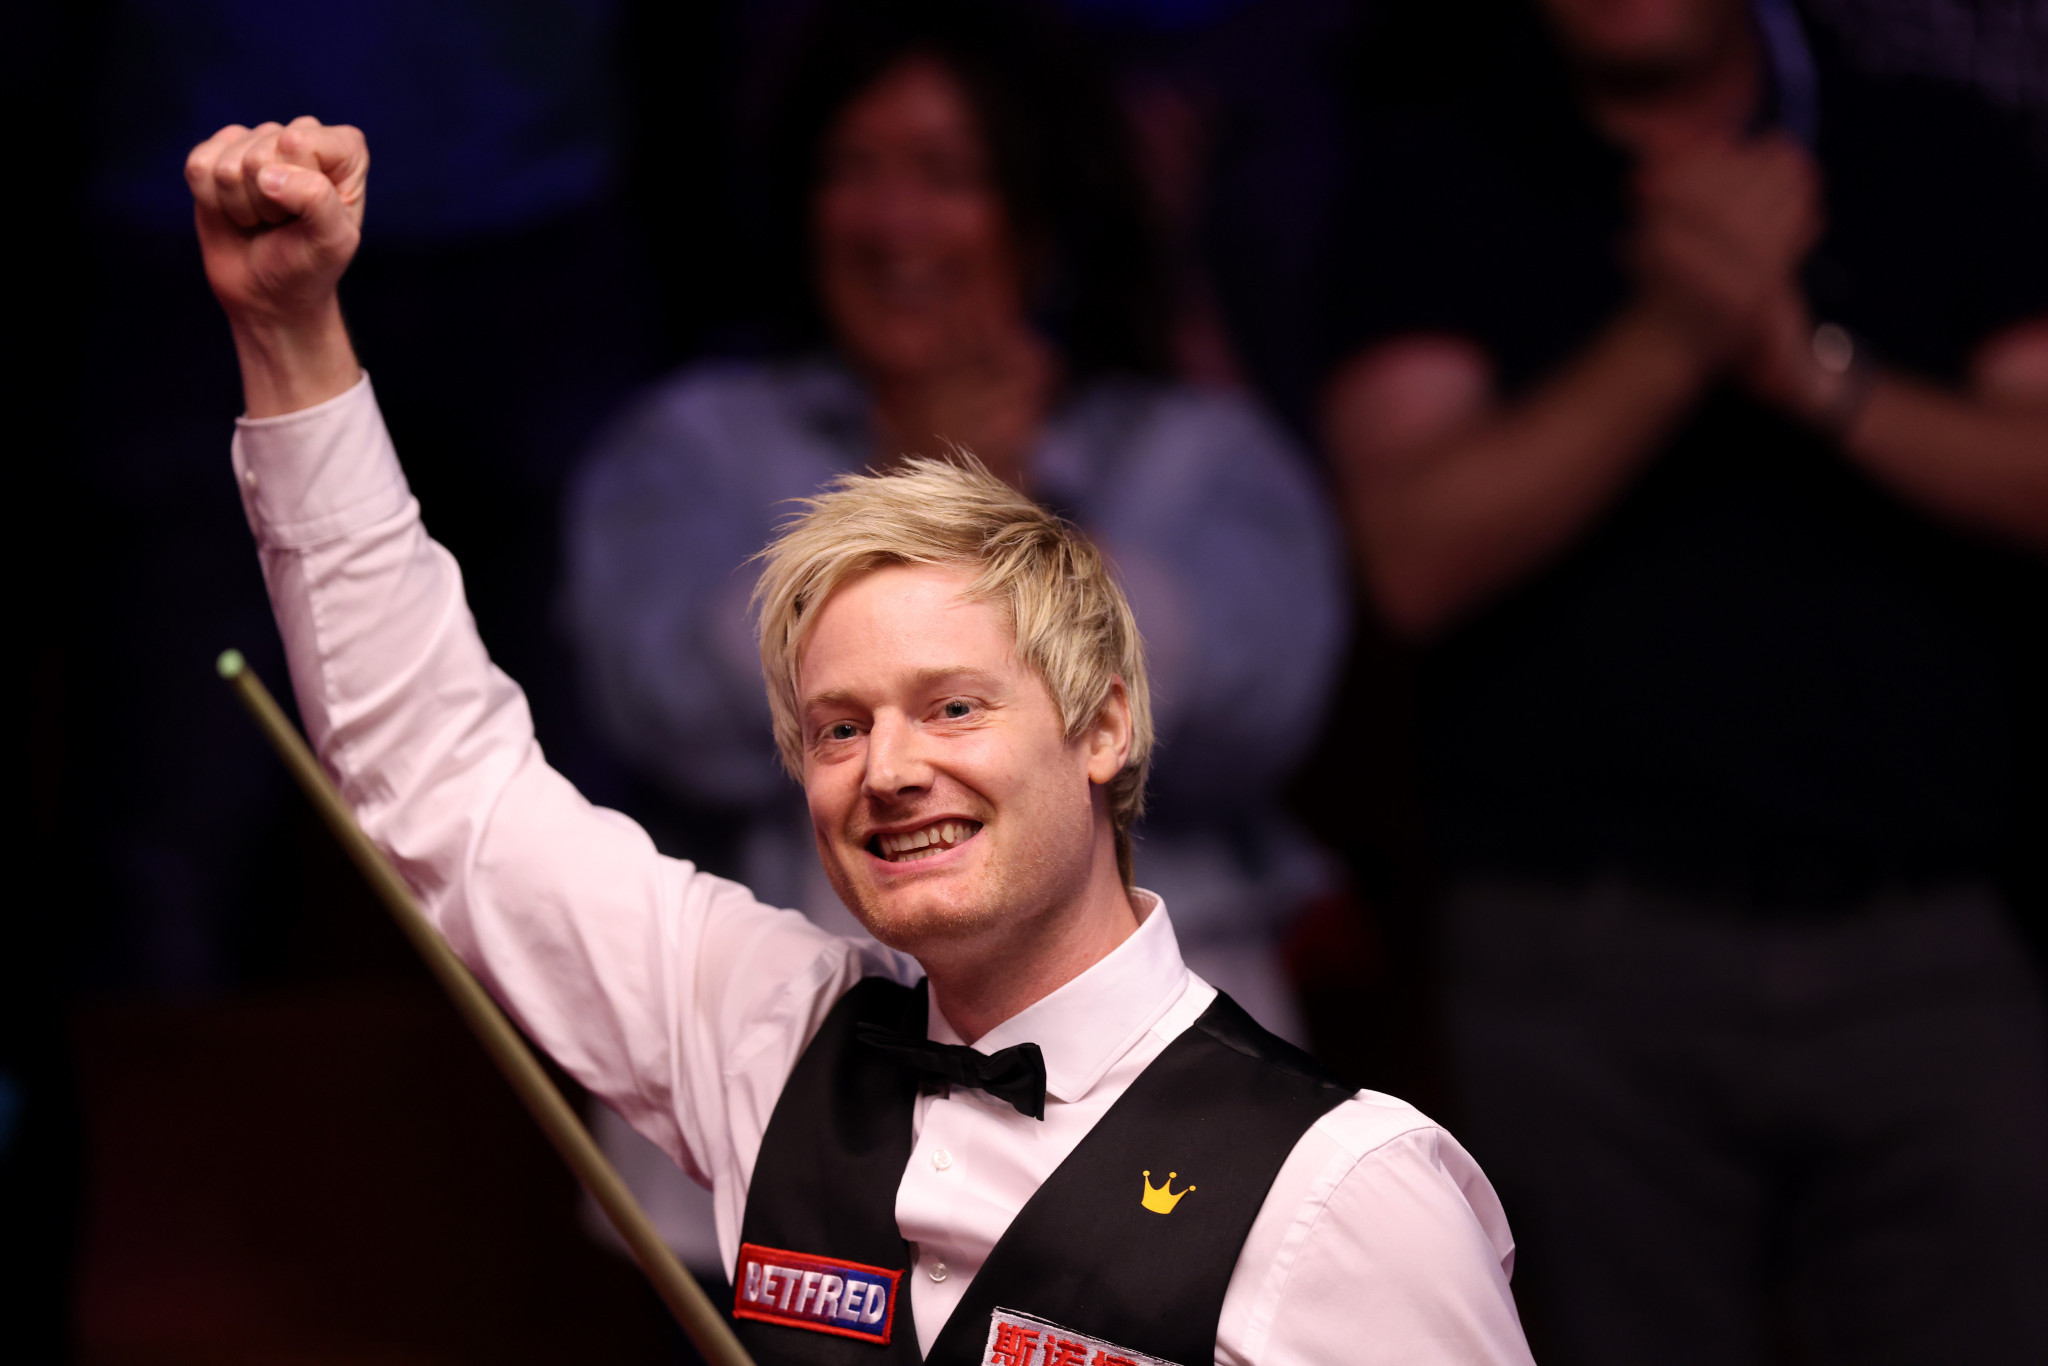 Neil Robertson became the eighth player to score a maximum at the World Snooker Championship in his second round match with Jack Lisowski 